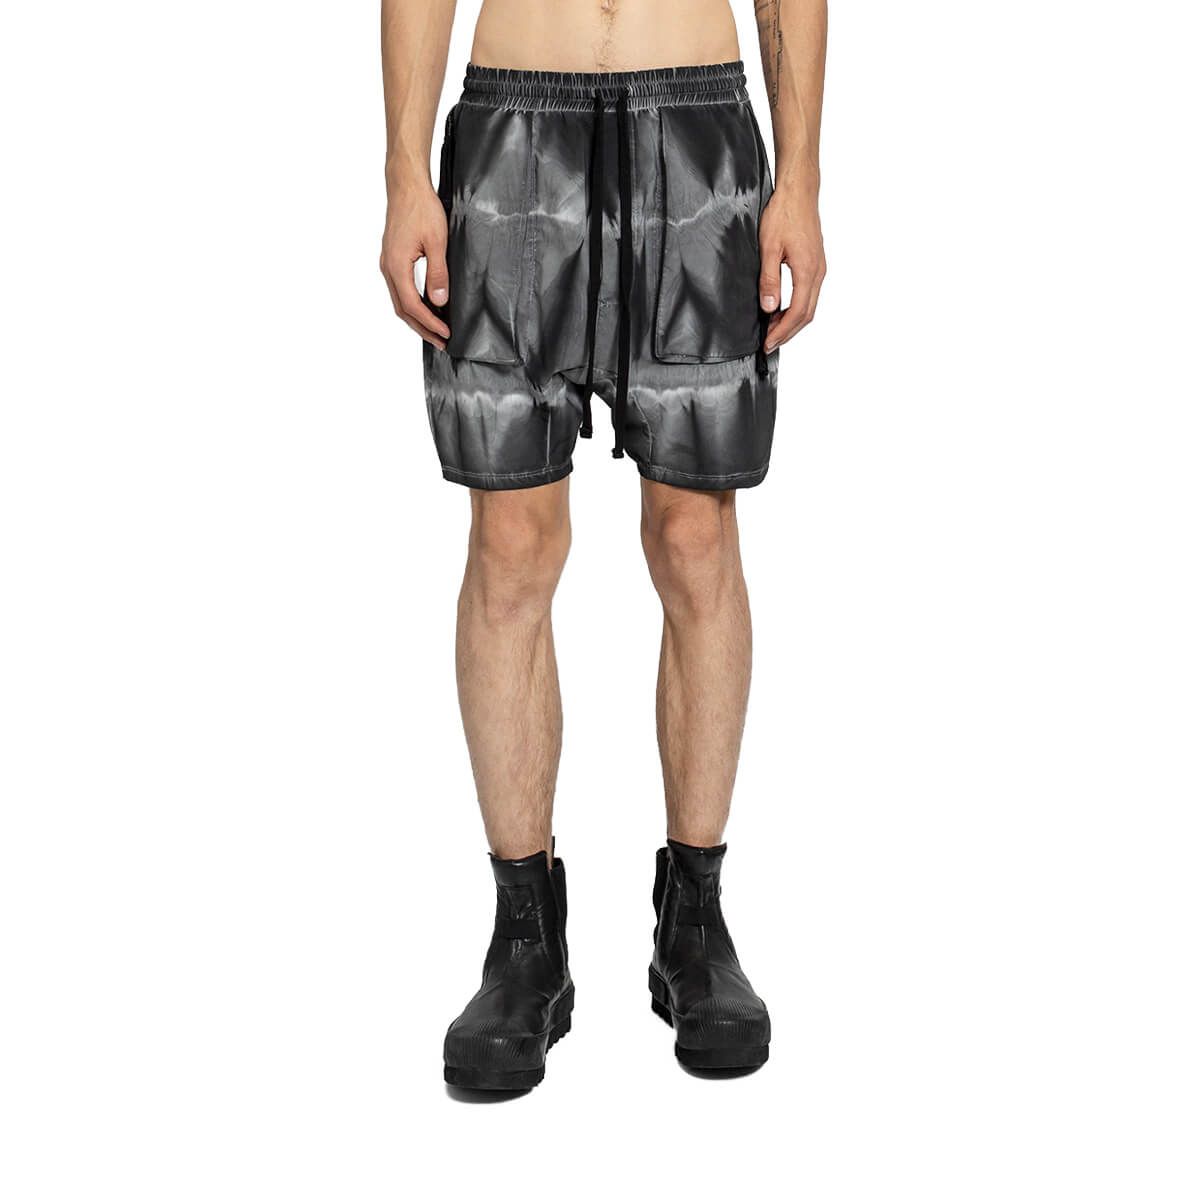 Black And White Marble Dye Shorts